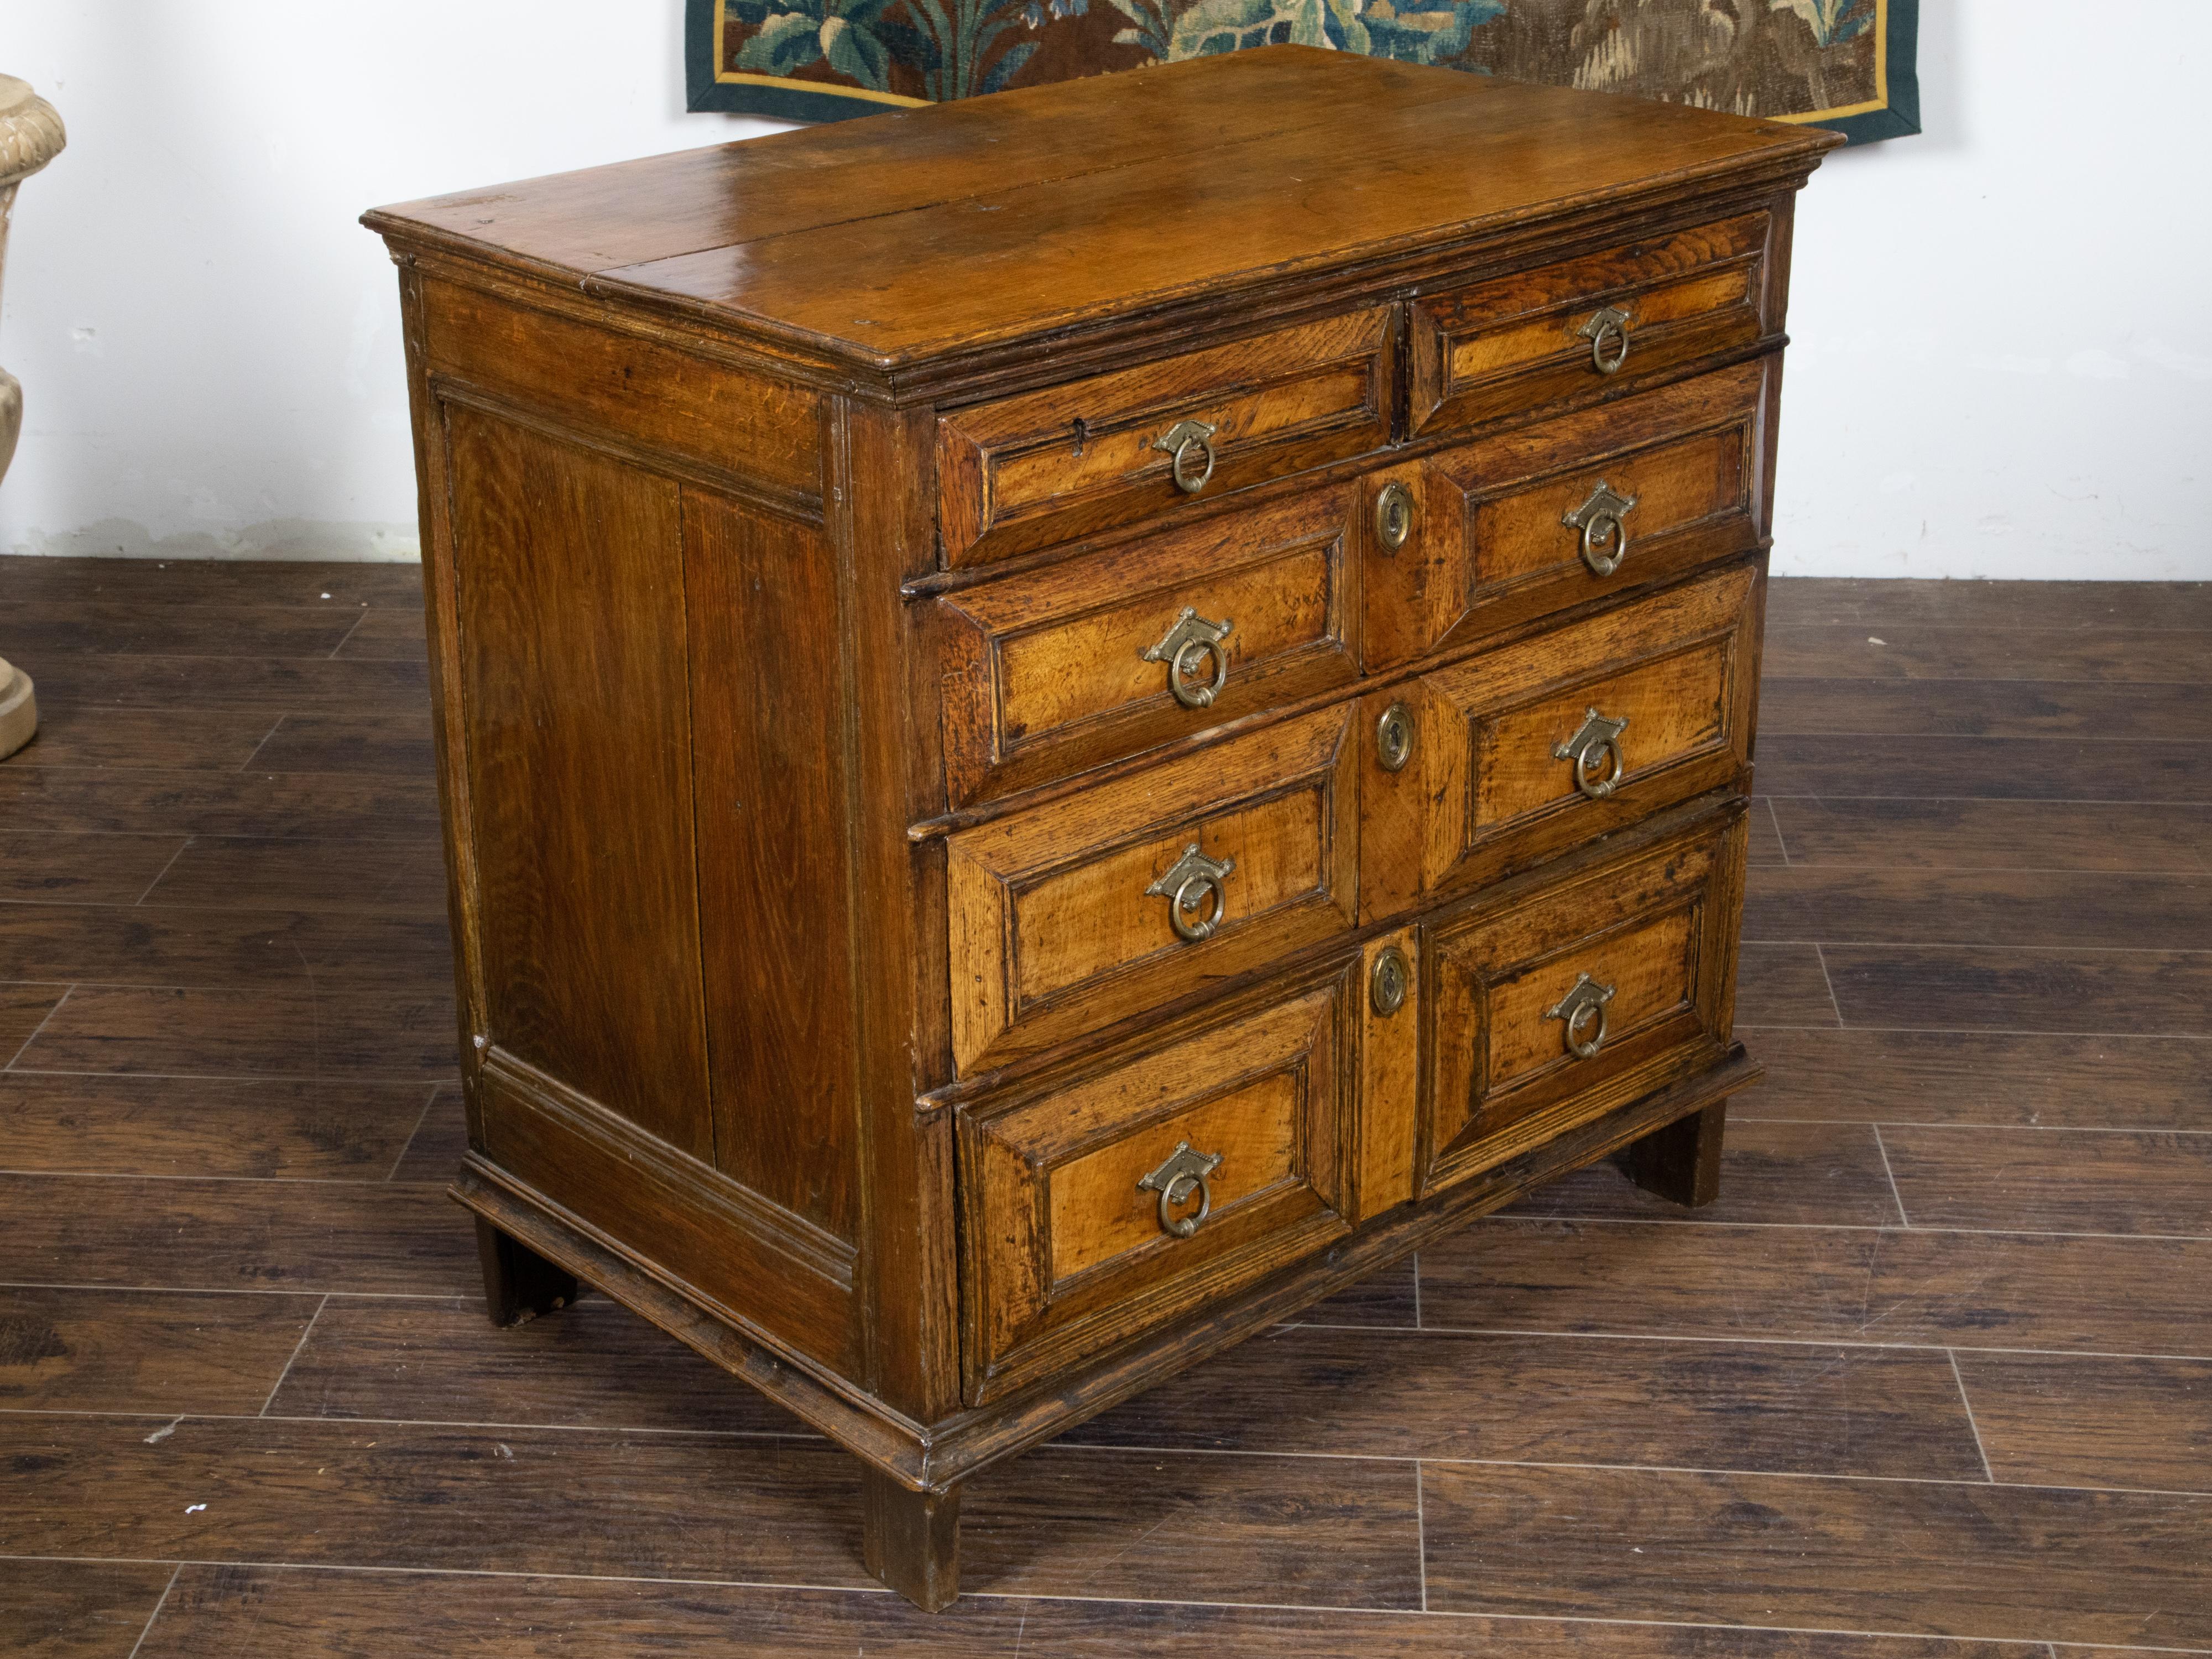 An English George III period oak commode from the early 19th century, with five graduating drawers, raised panels, brass hardware and short feet. Created in England during the George III period in the early years of the 19th century, this oak